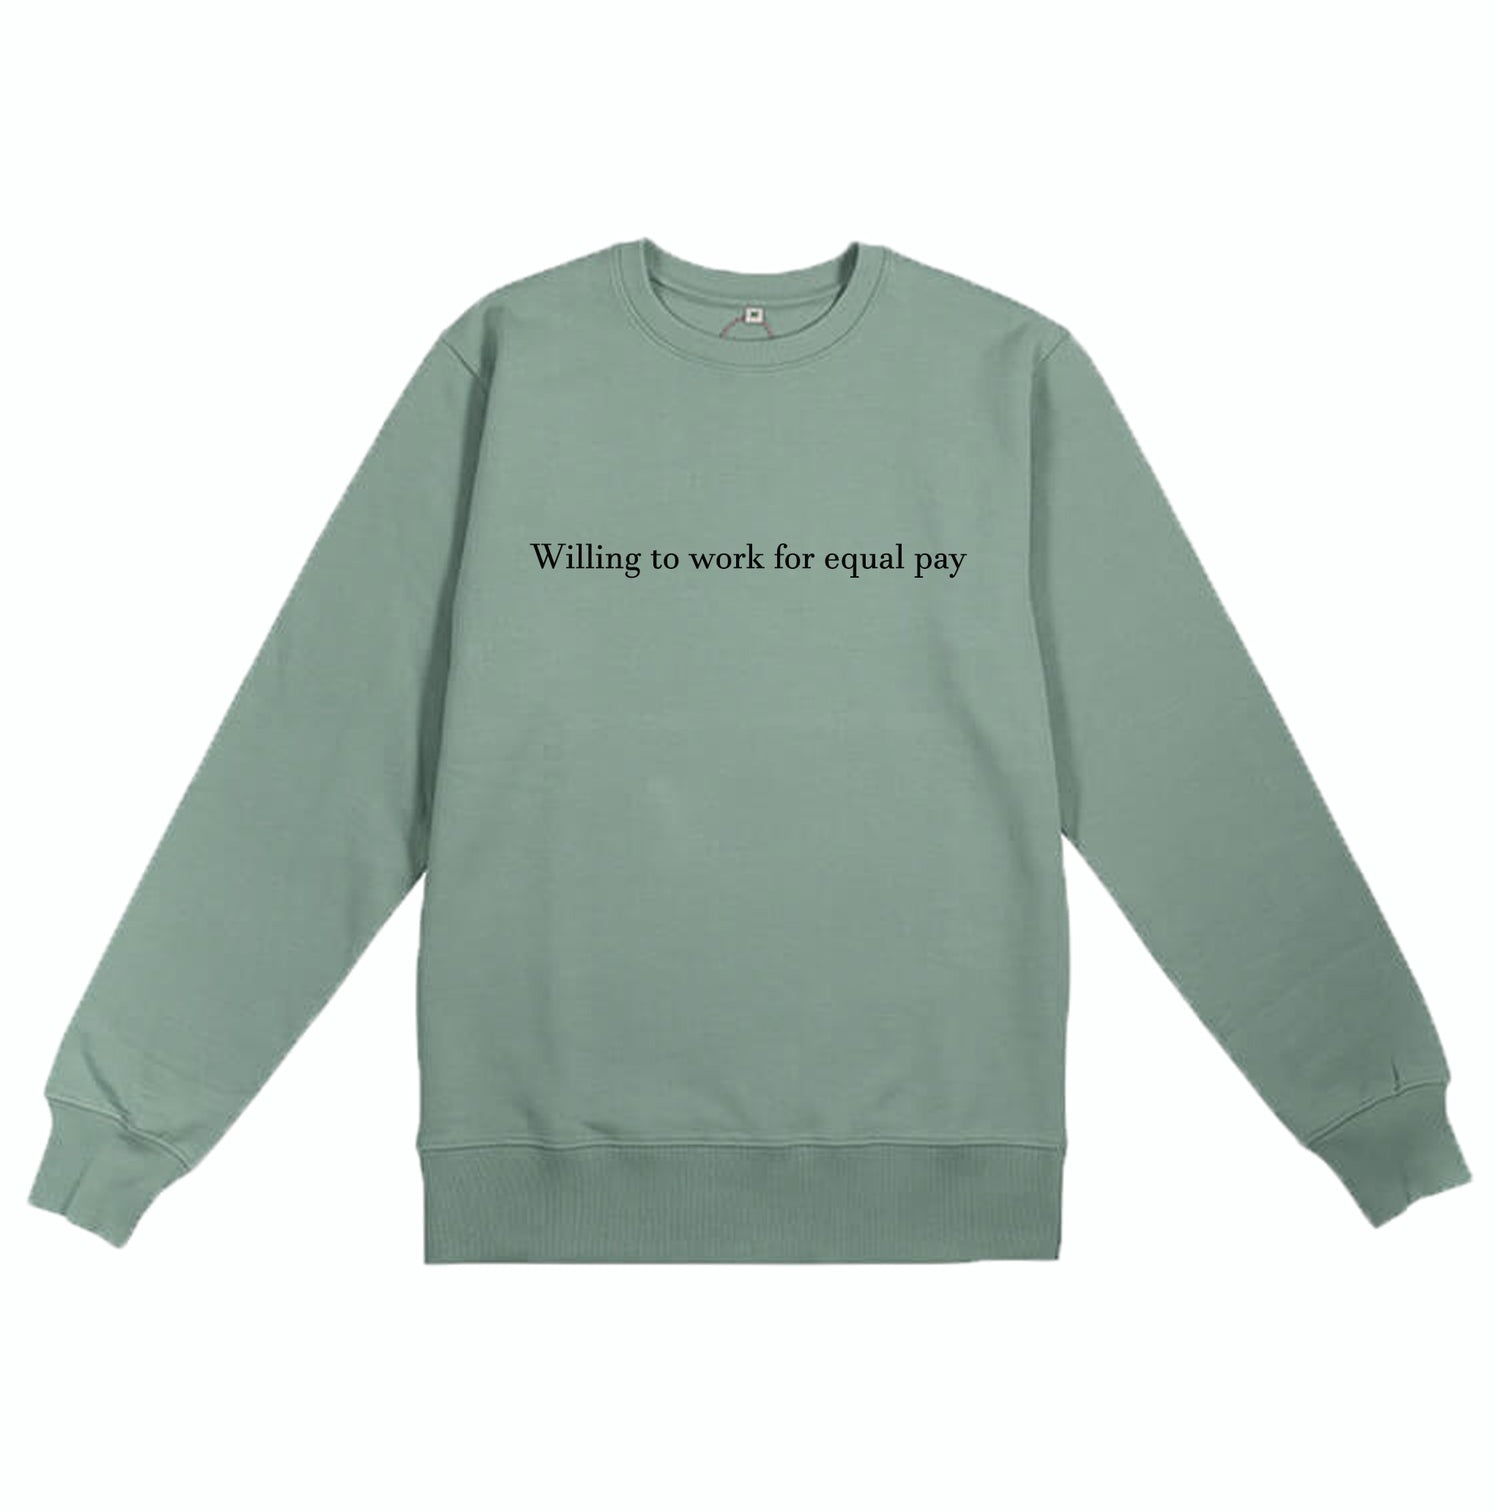 Willing to work for equal pay Organic Sweatshirt